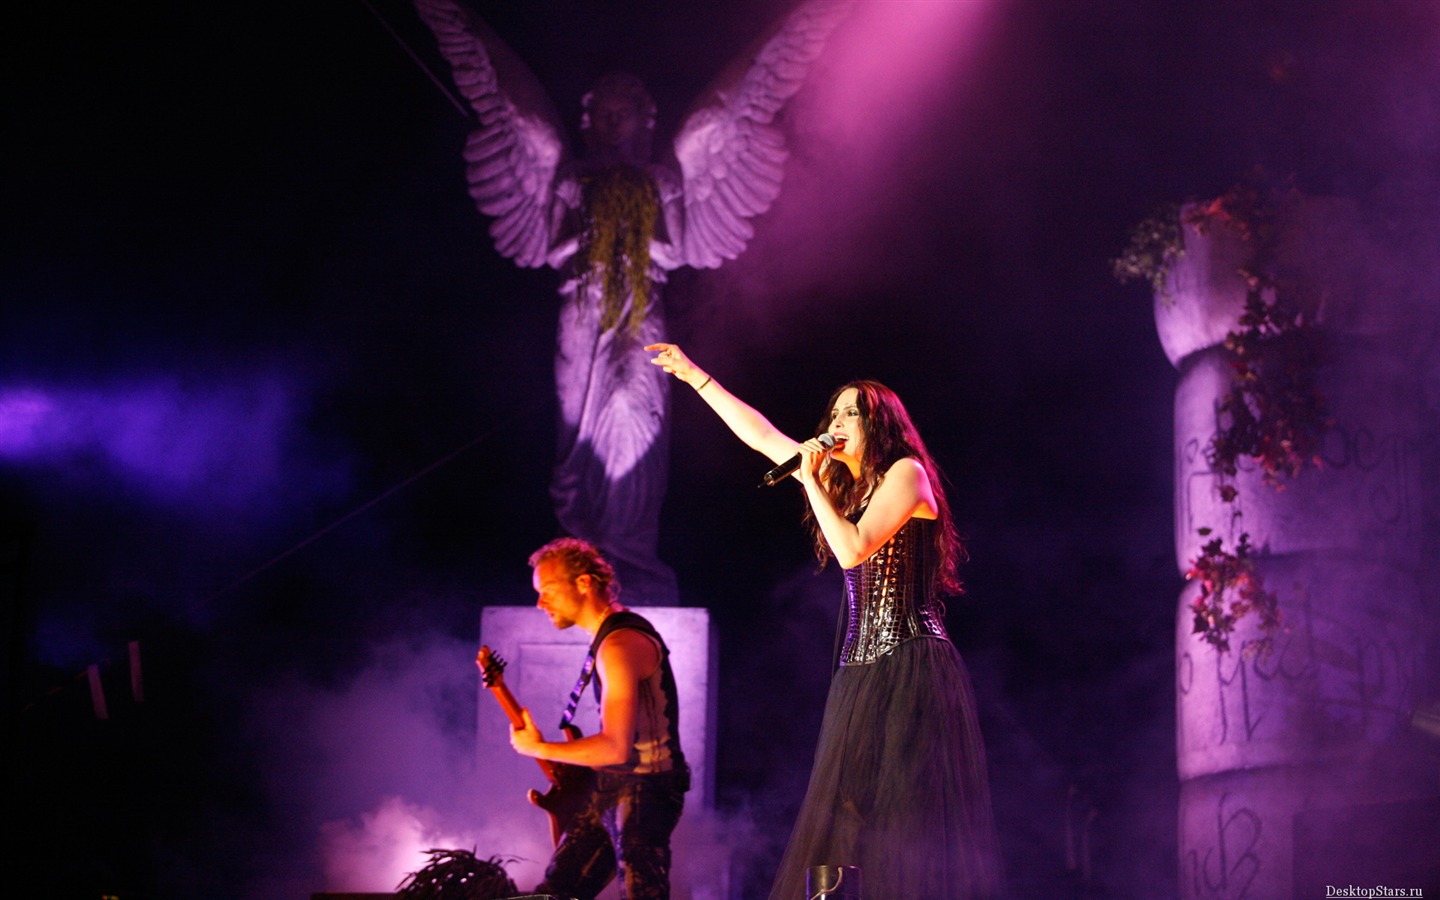 Sharon den Adel #014 - 1440x900 Wallpapers Pictures Photos Images